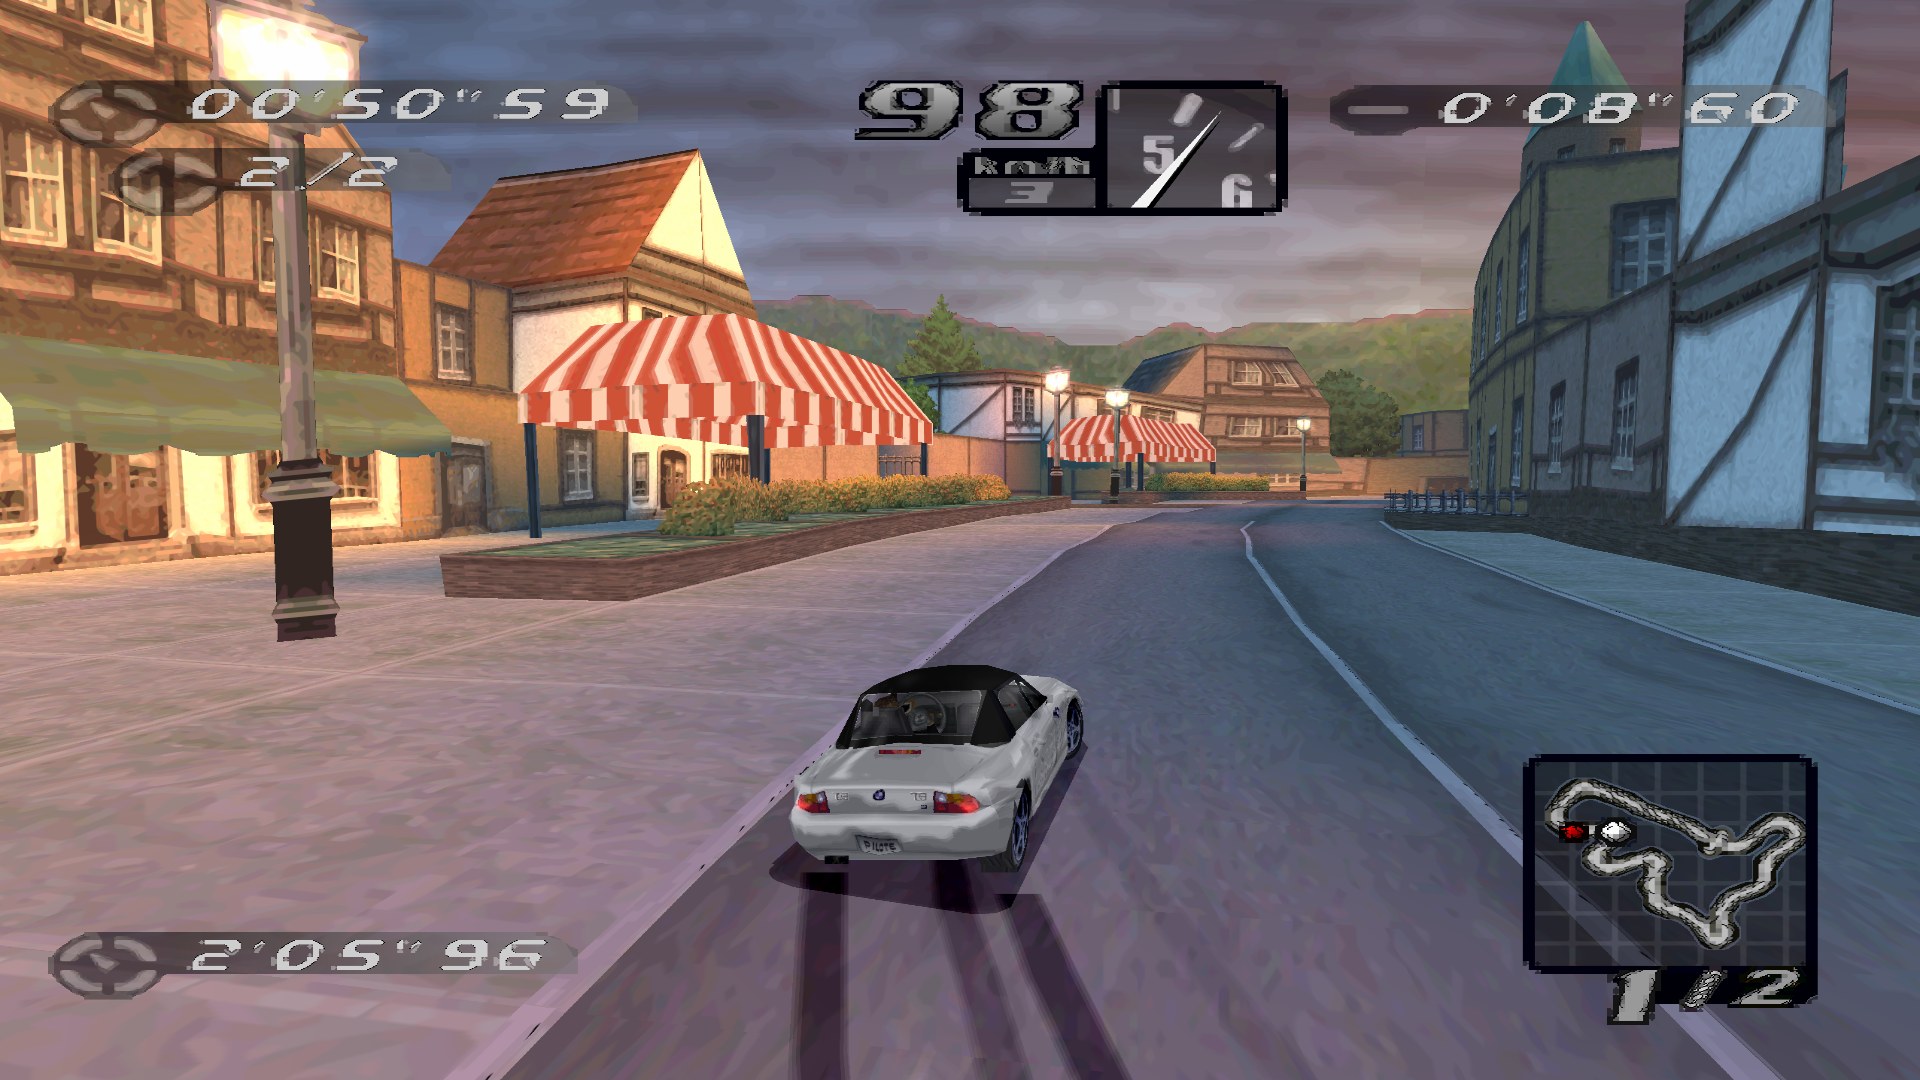 High stakes ps1. NFS 4 High stakes. NFS 4 ps1. Need for Speed 4 High stakes ps1. Need for Speed High stakes.